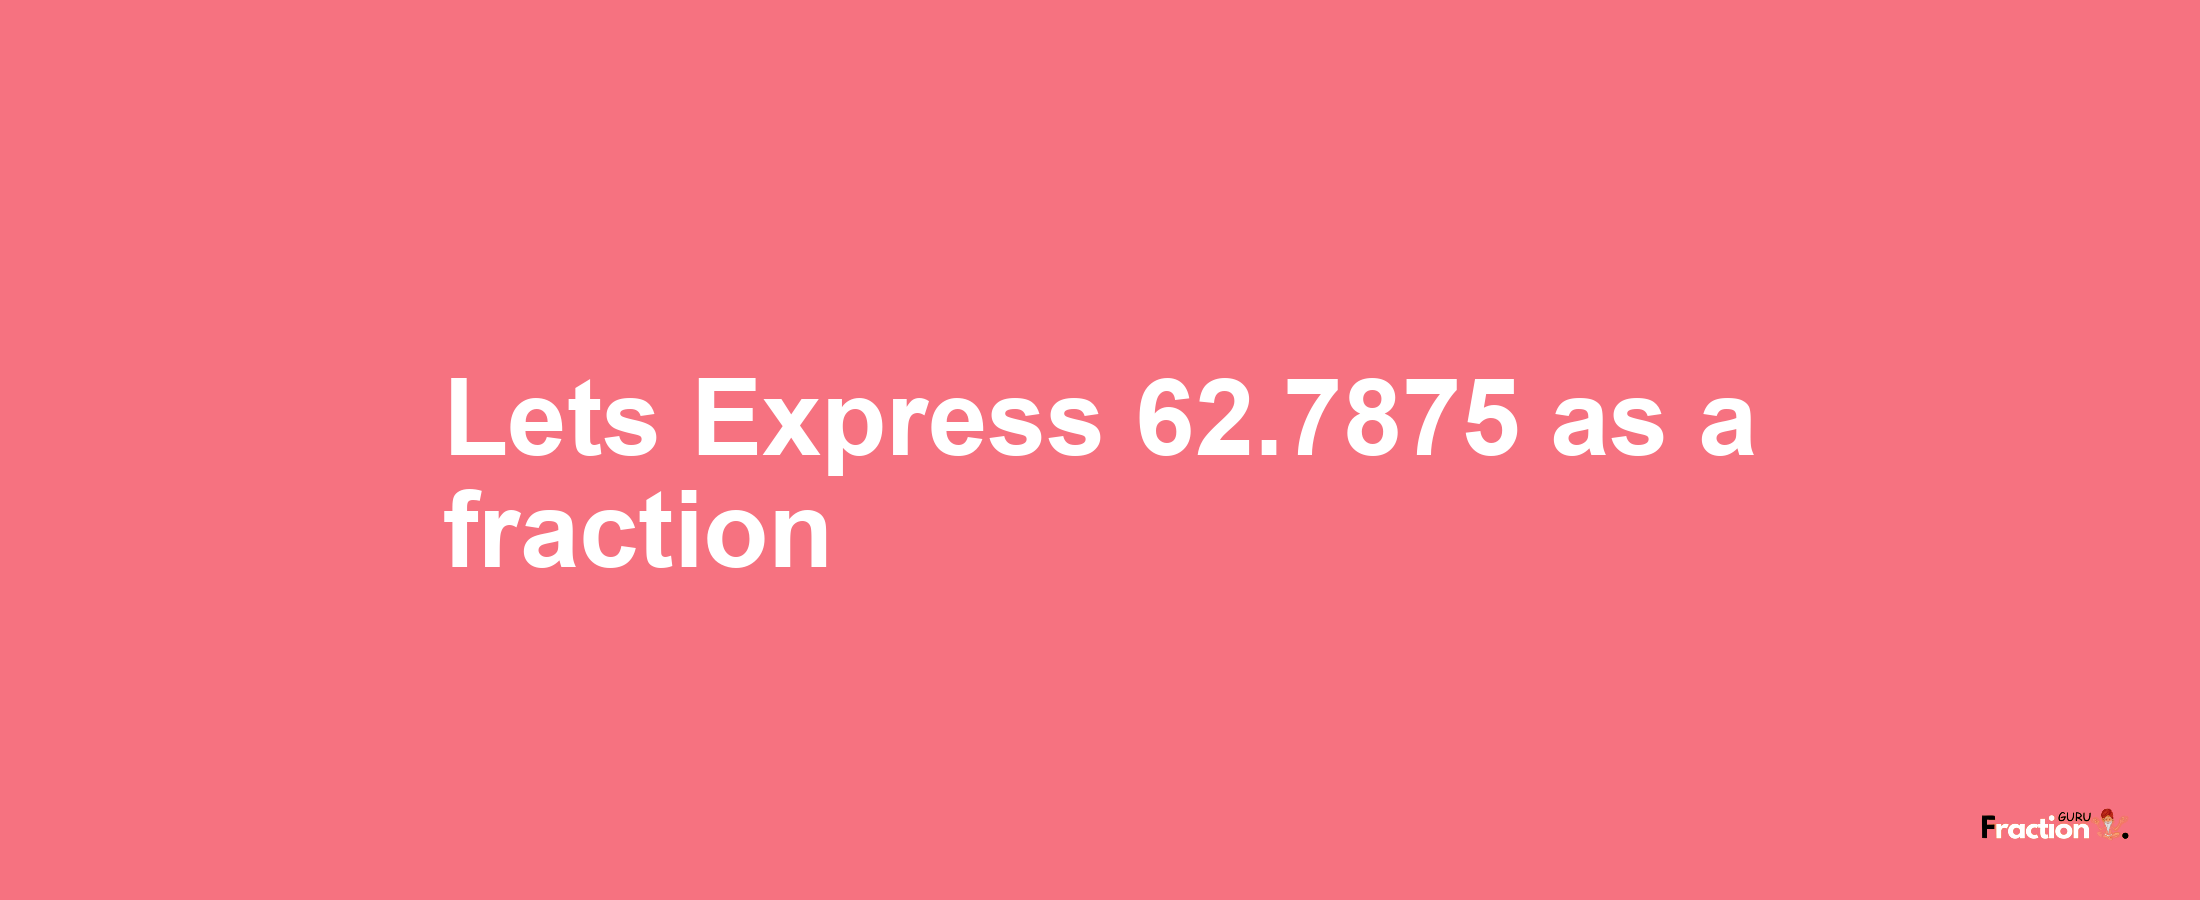 Lets Express 62.7875 as afraction